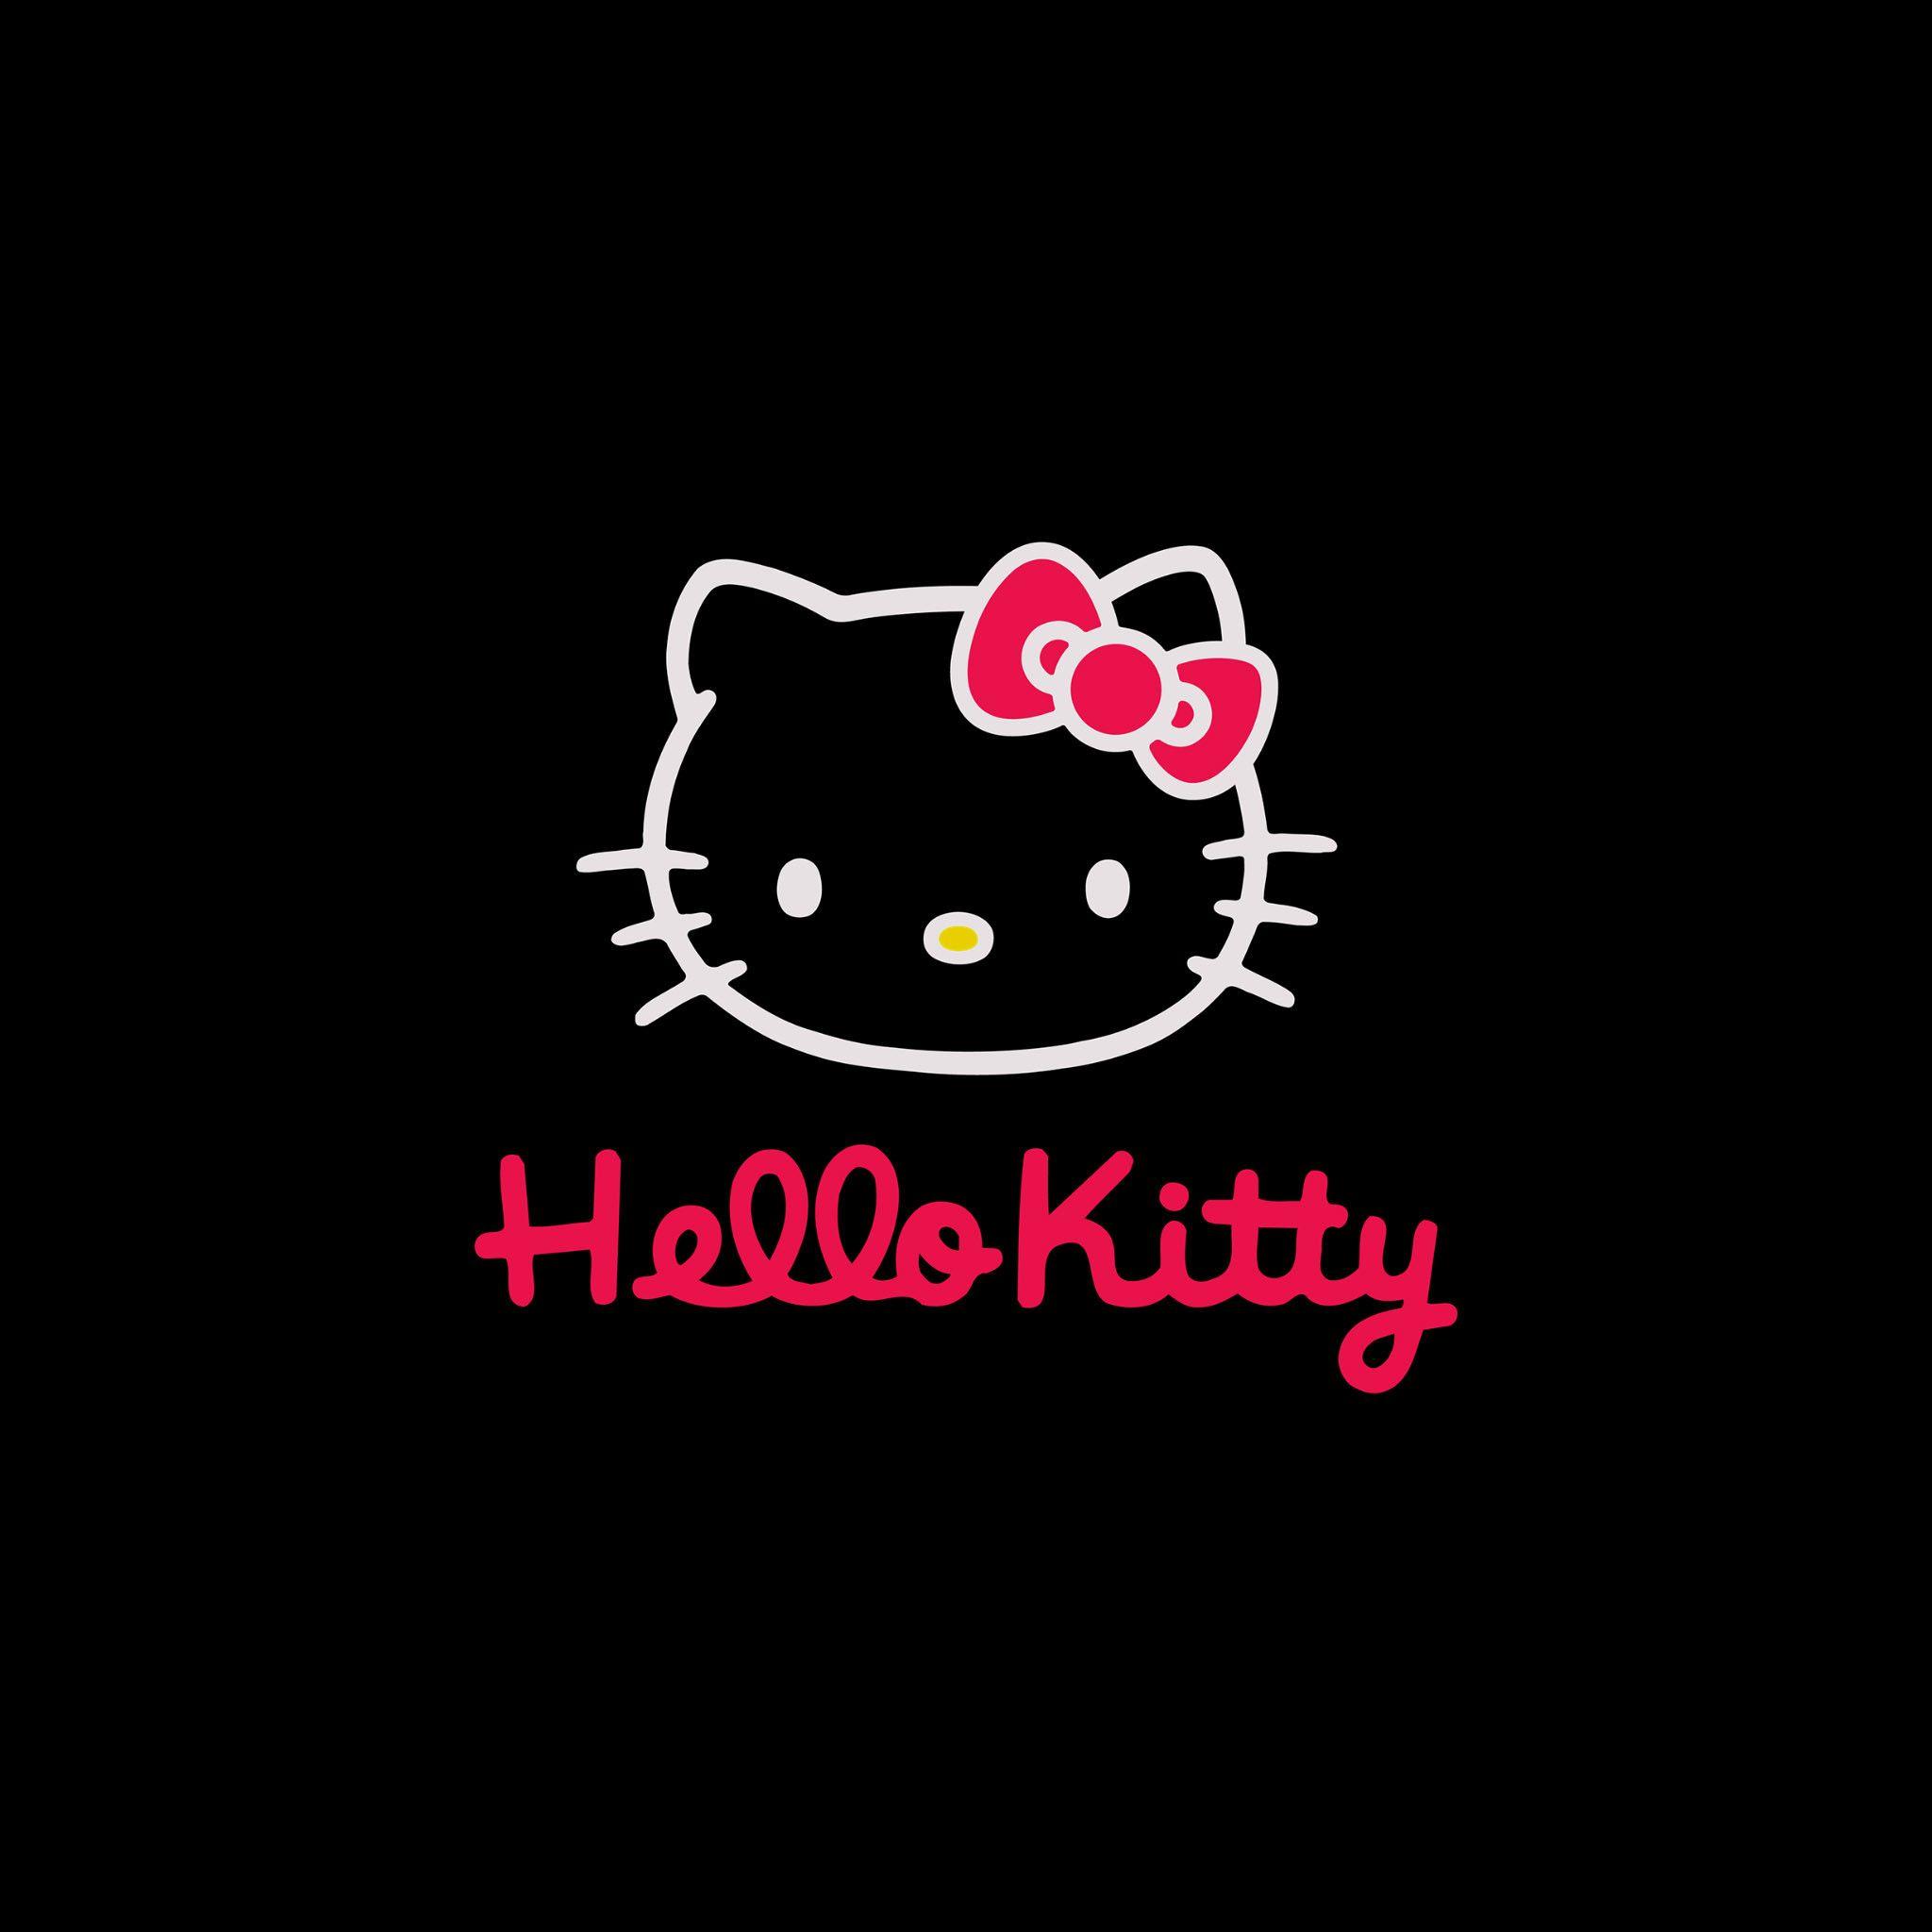 Black And White Hello Kitty Wallpapers Top Free Black And White Hello Kitty Backgrounds Wallpaperaccess